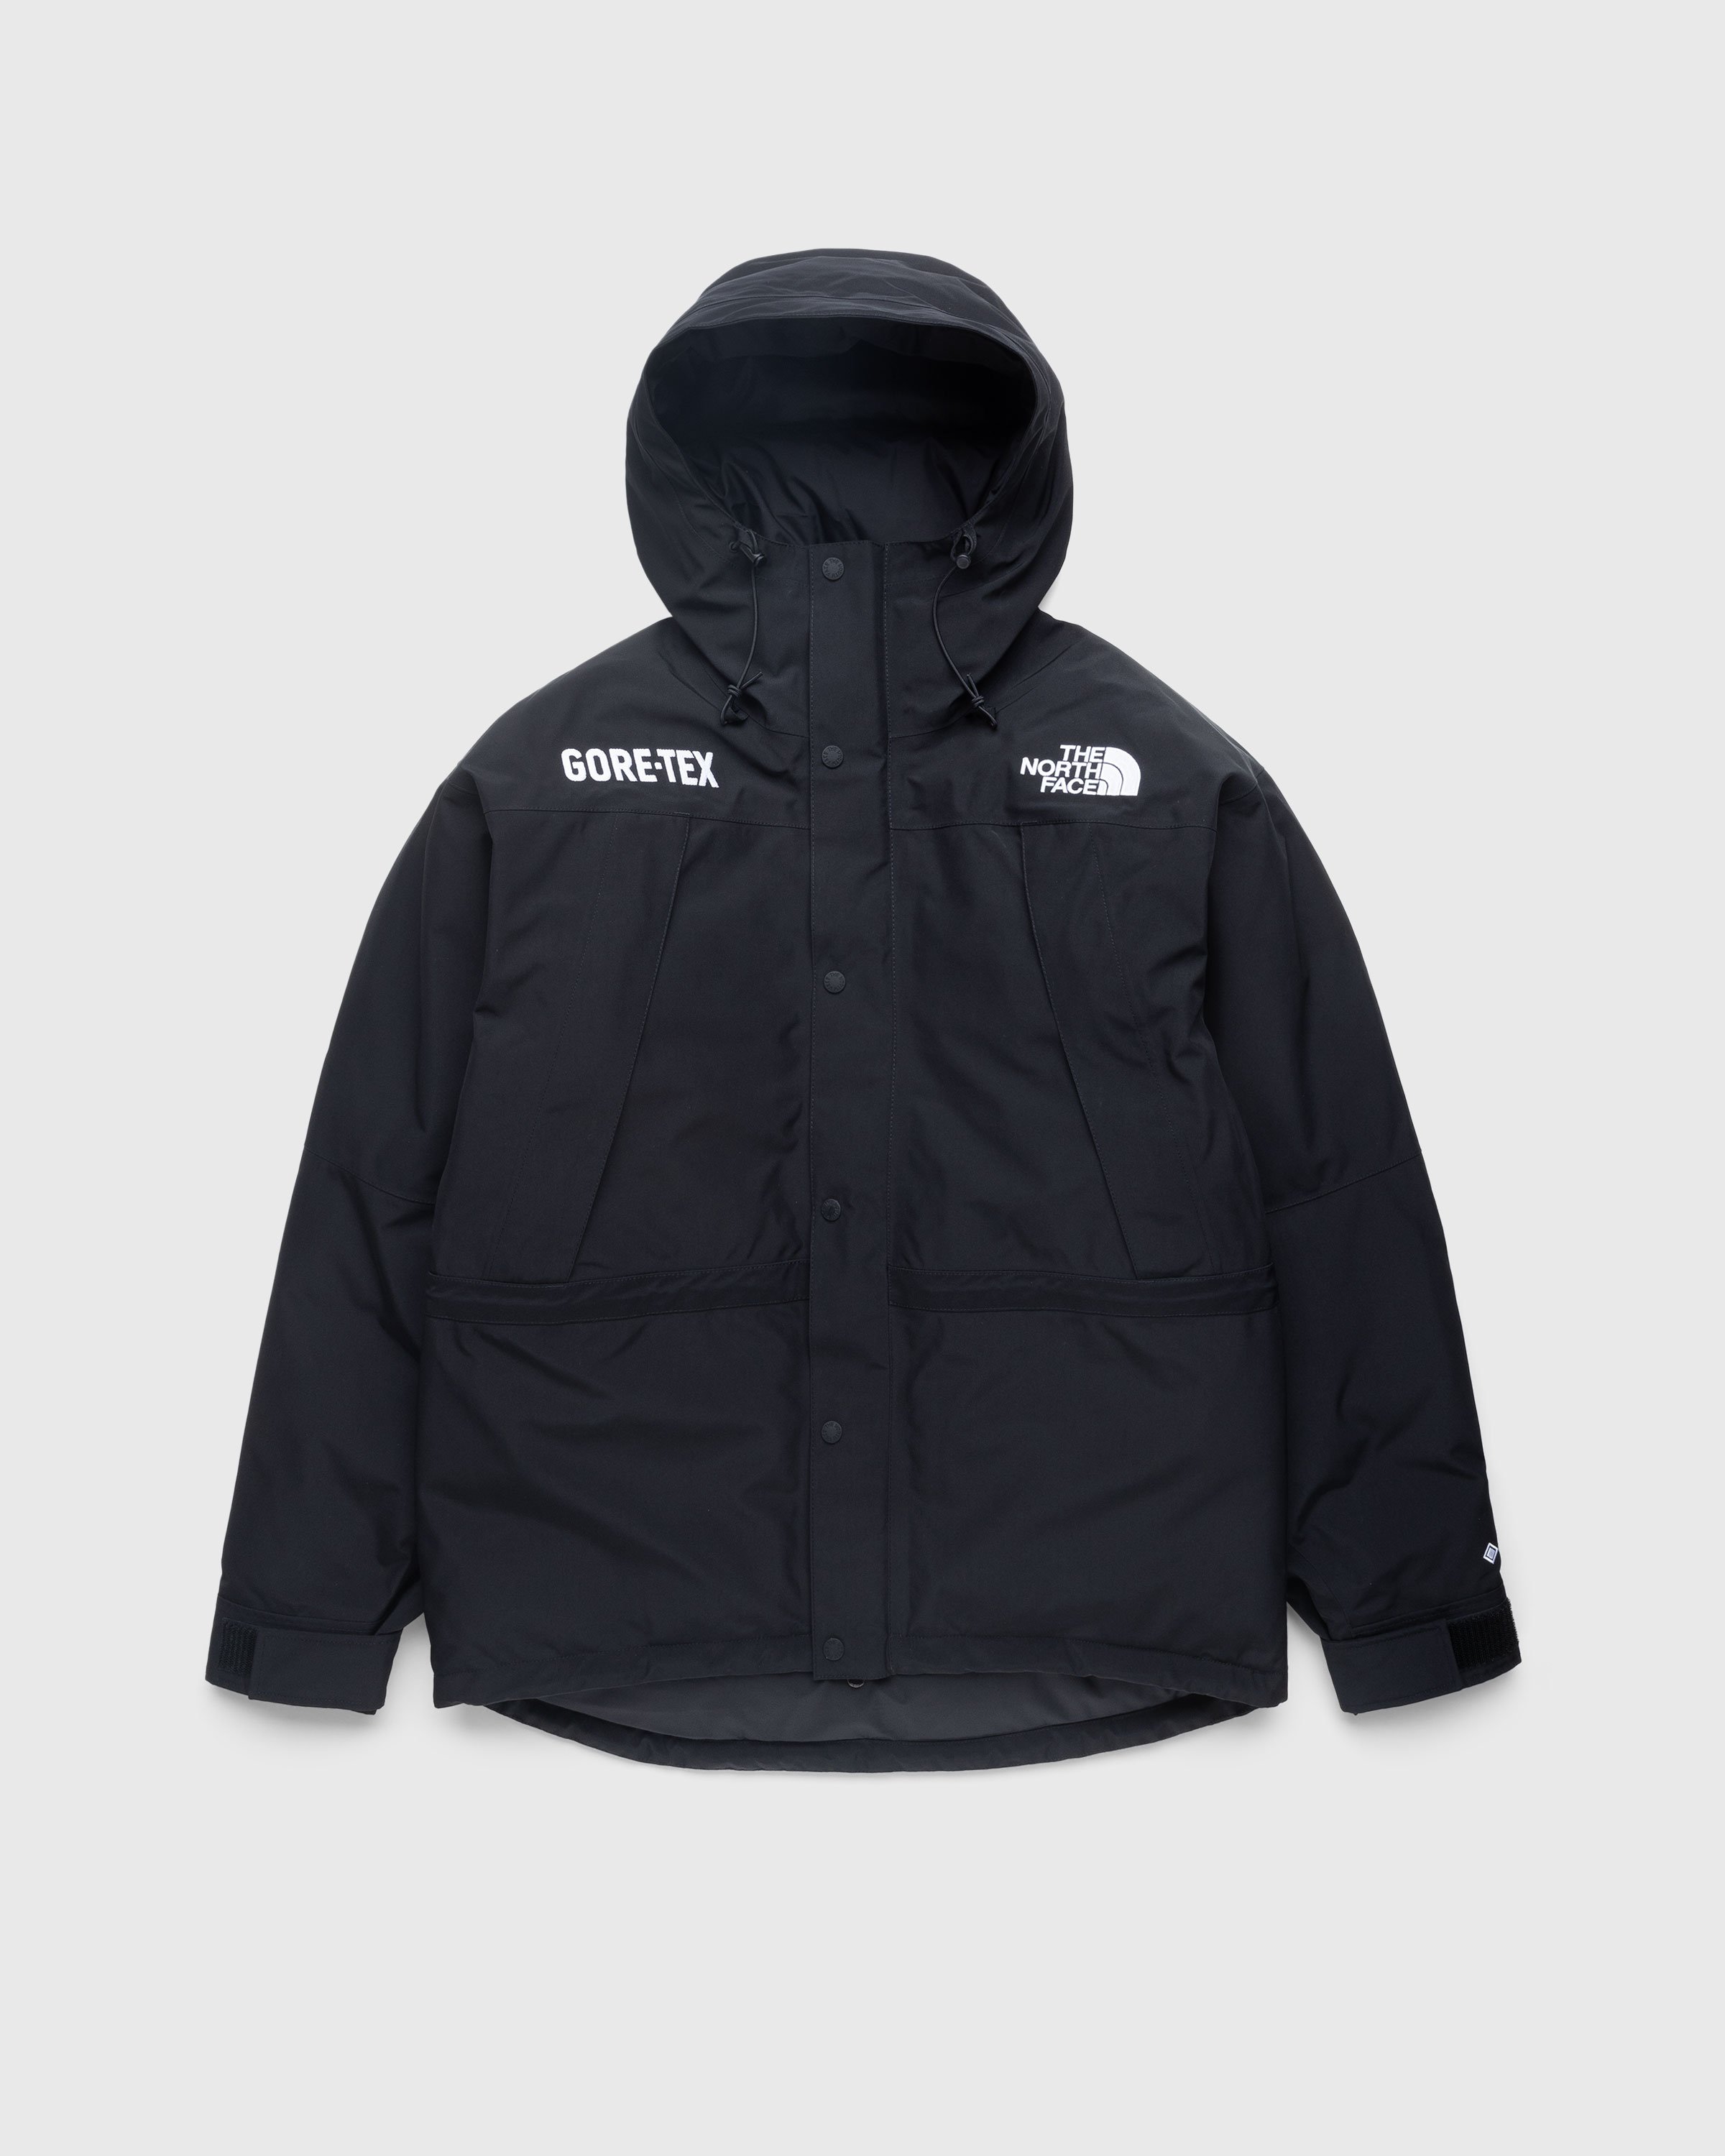 The North Face - GORE-TEX Mountain Guide Insulated Jacket Black - Clothing - Black - Image 1